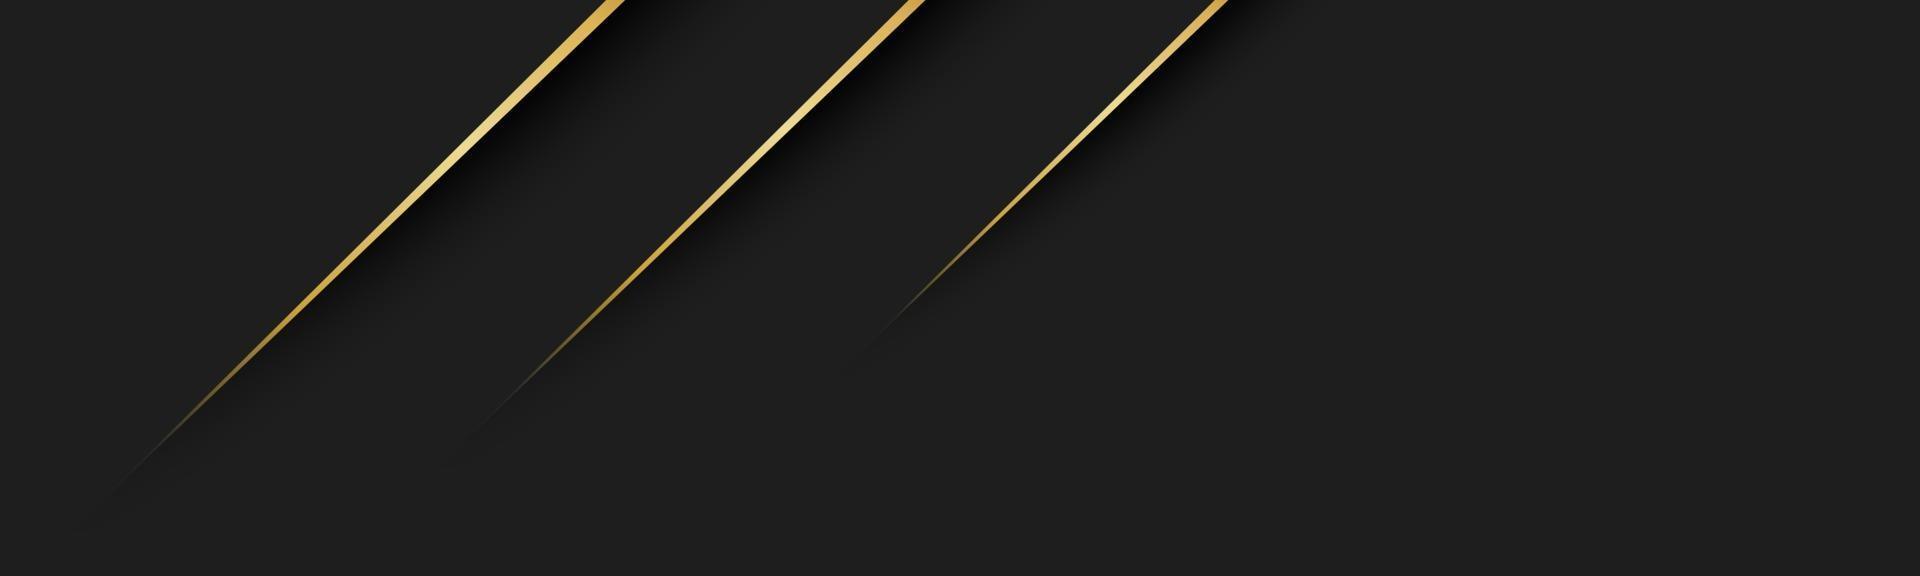 Black abstract modern header with gold lines Dark corporate banner with blank place for your text Modern vector